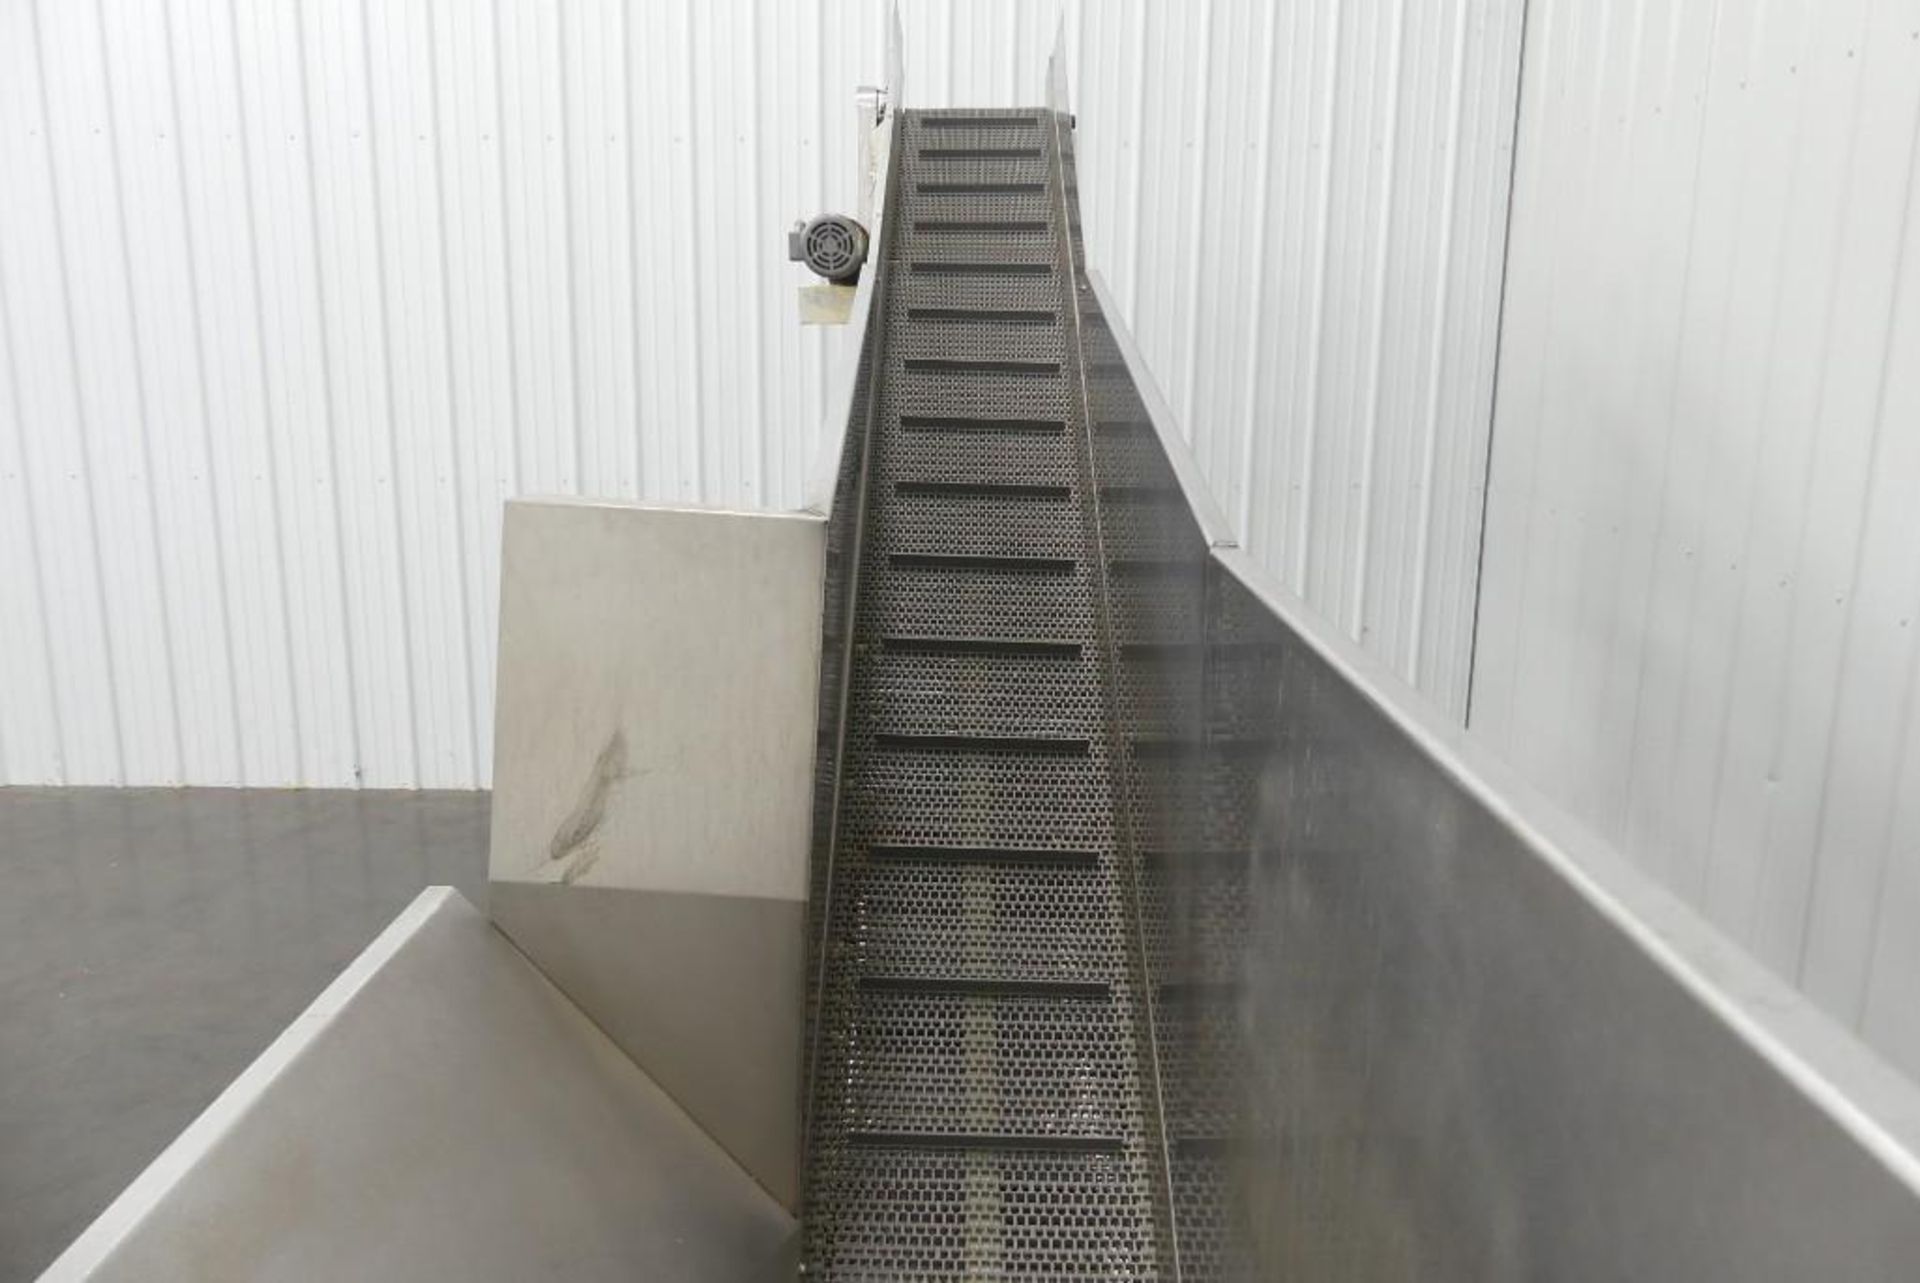 Cleated Incline Conveyor with Hopper 16" Wide - Image 6 of 7